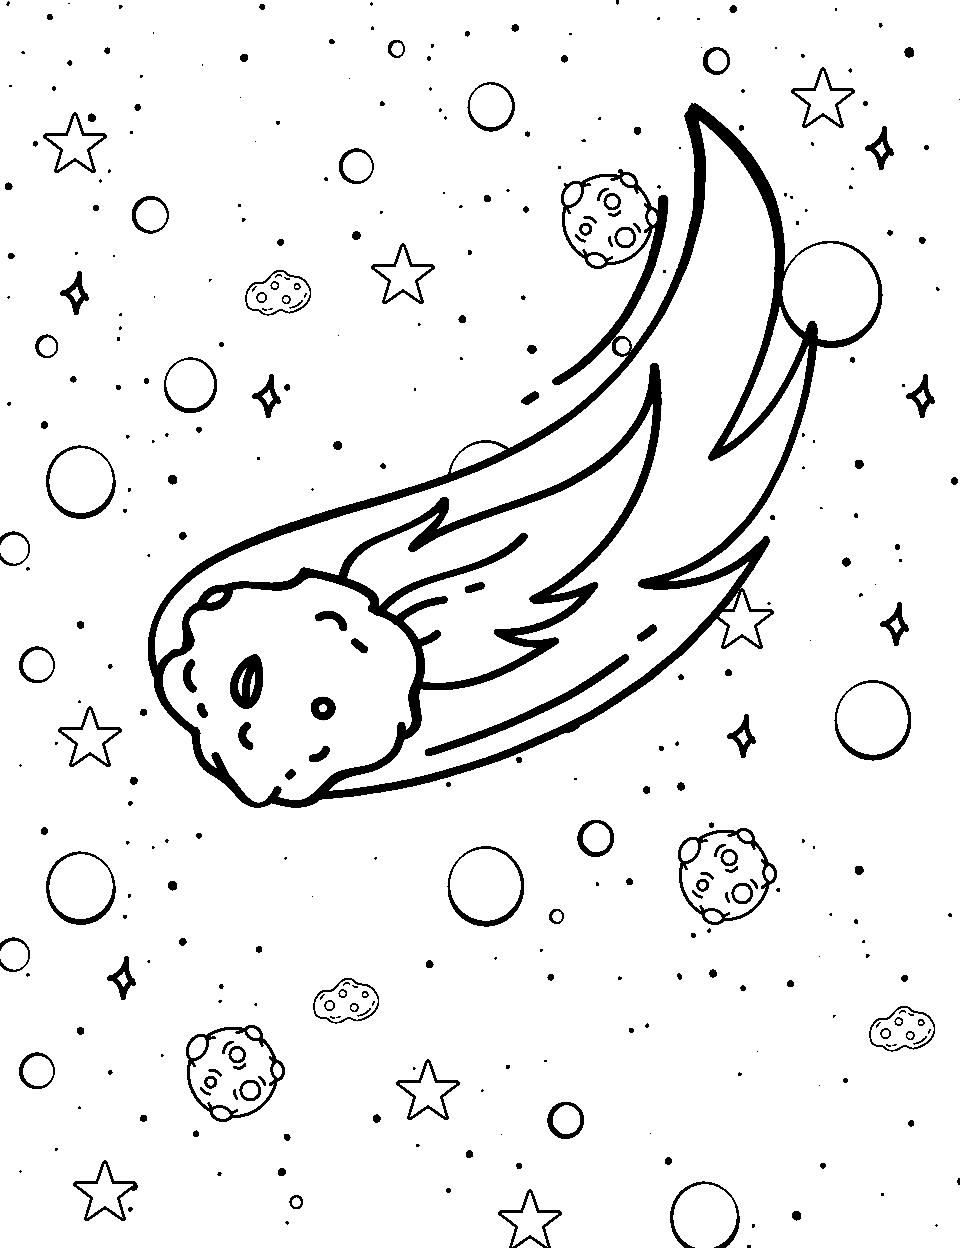 Comet's Tail Trail Coloring Page - A comet with a long, fiery tail moving through space.